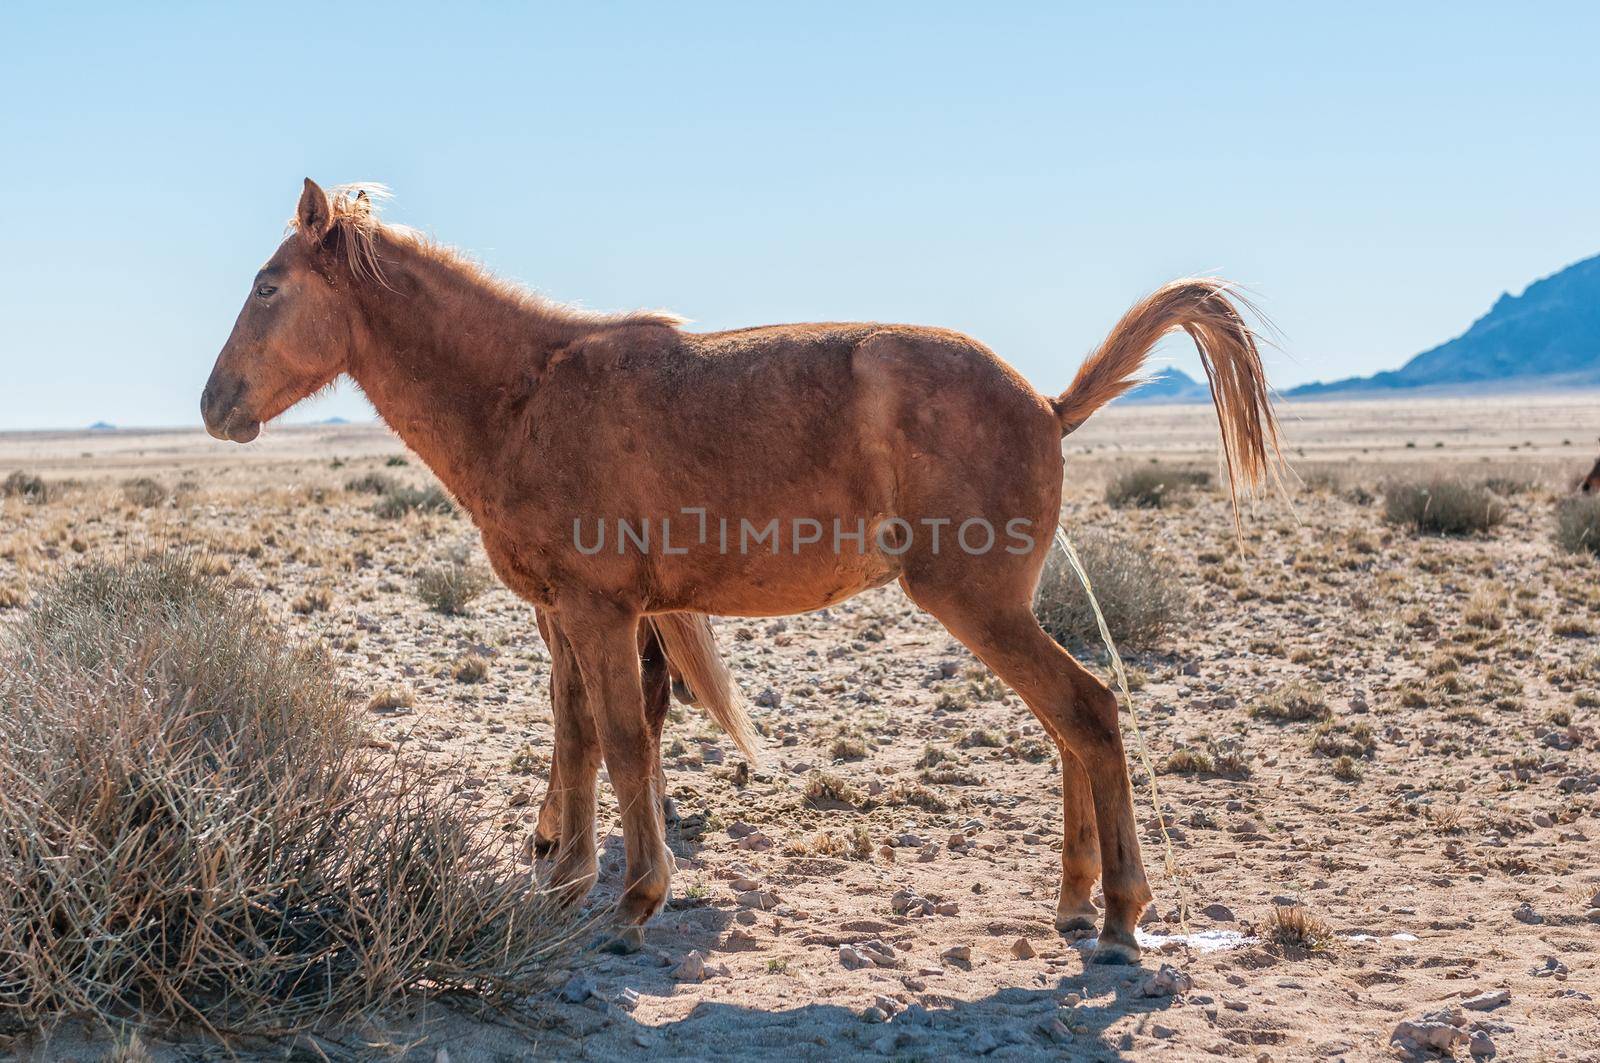 A wild horse of the Namib mare urinating by dpreezg